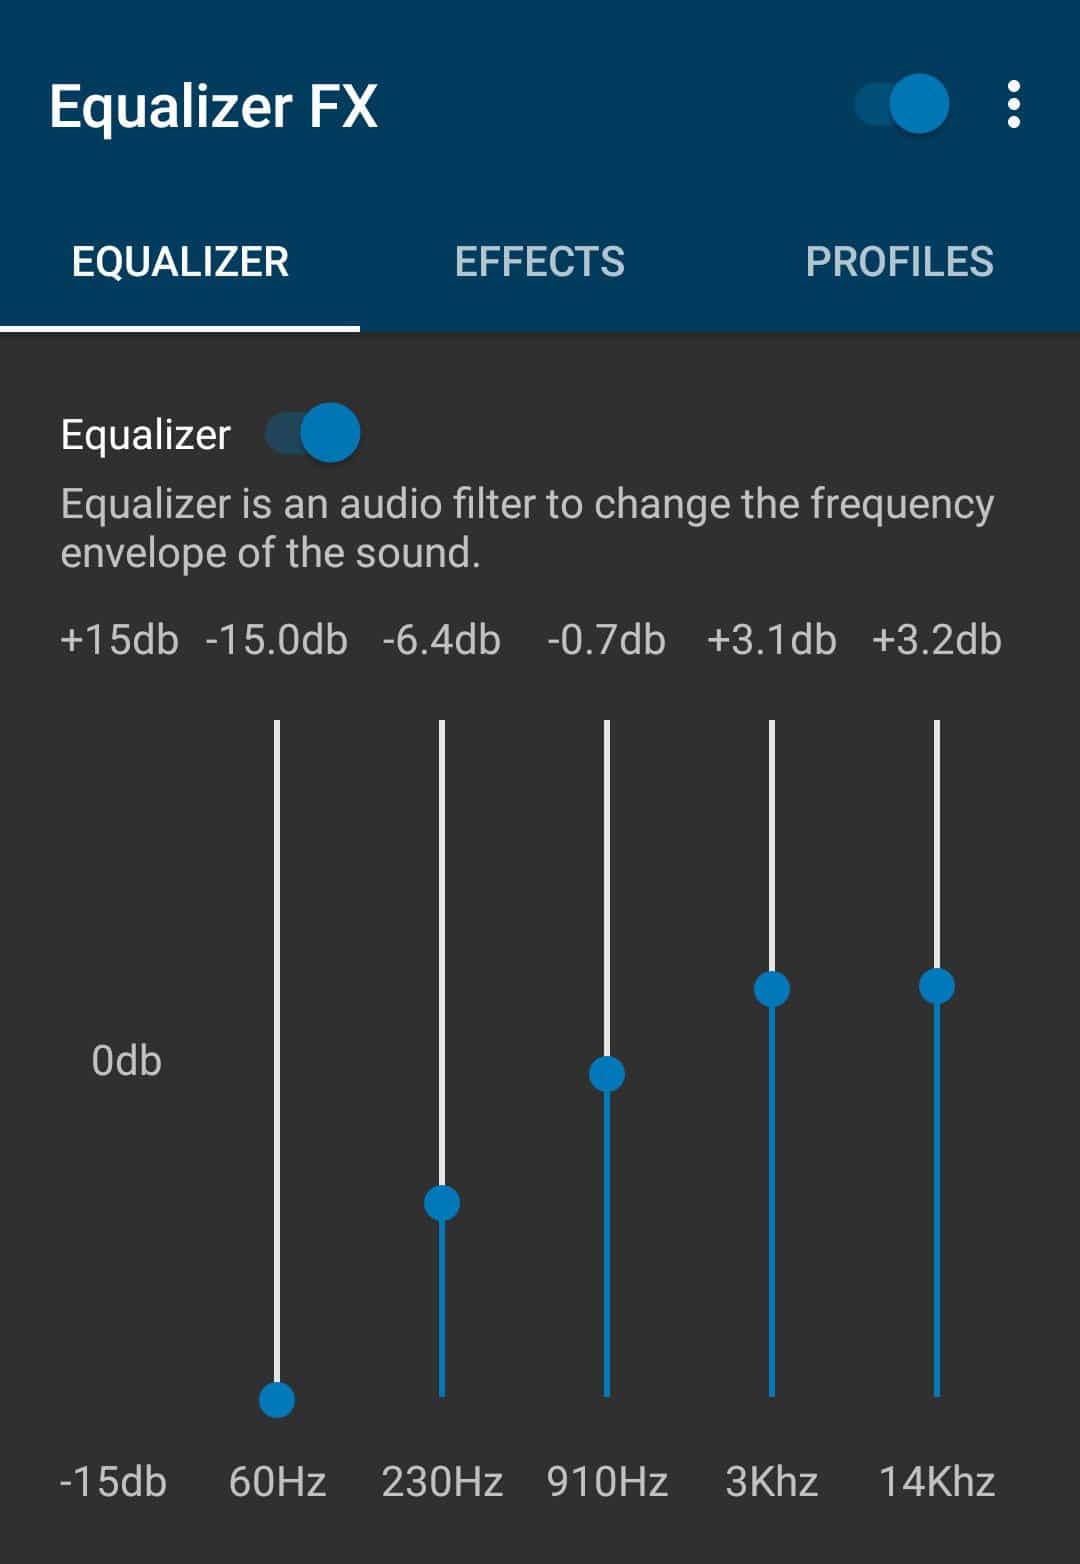 Most headphones come with an equalizer but adjusting the equalizer levels might help.